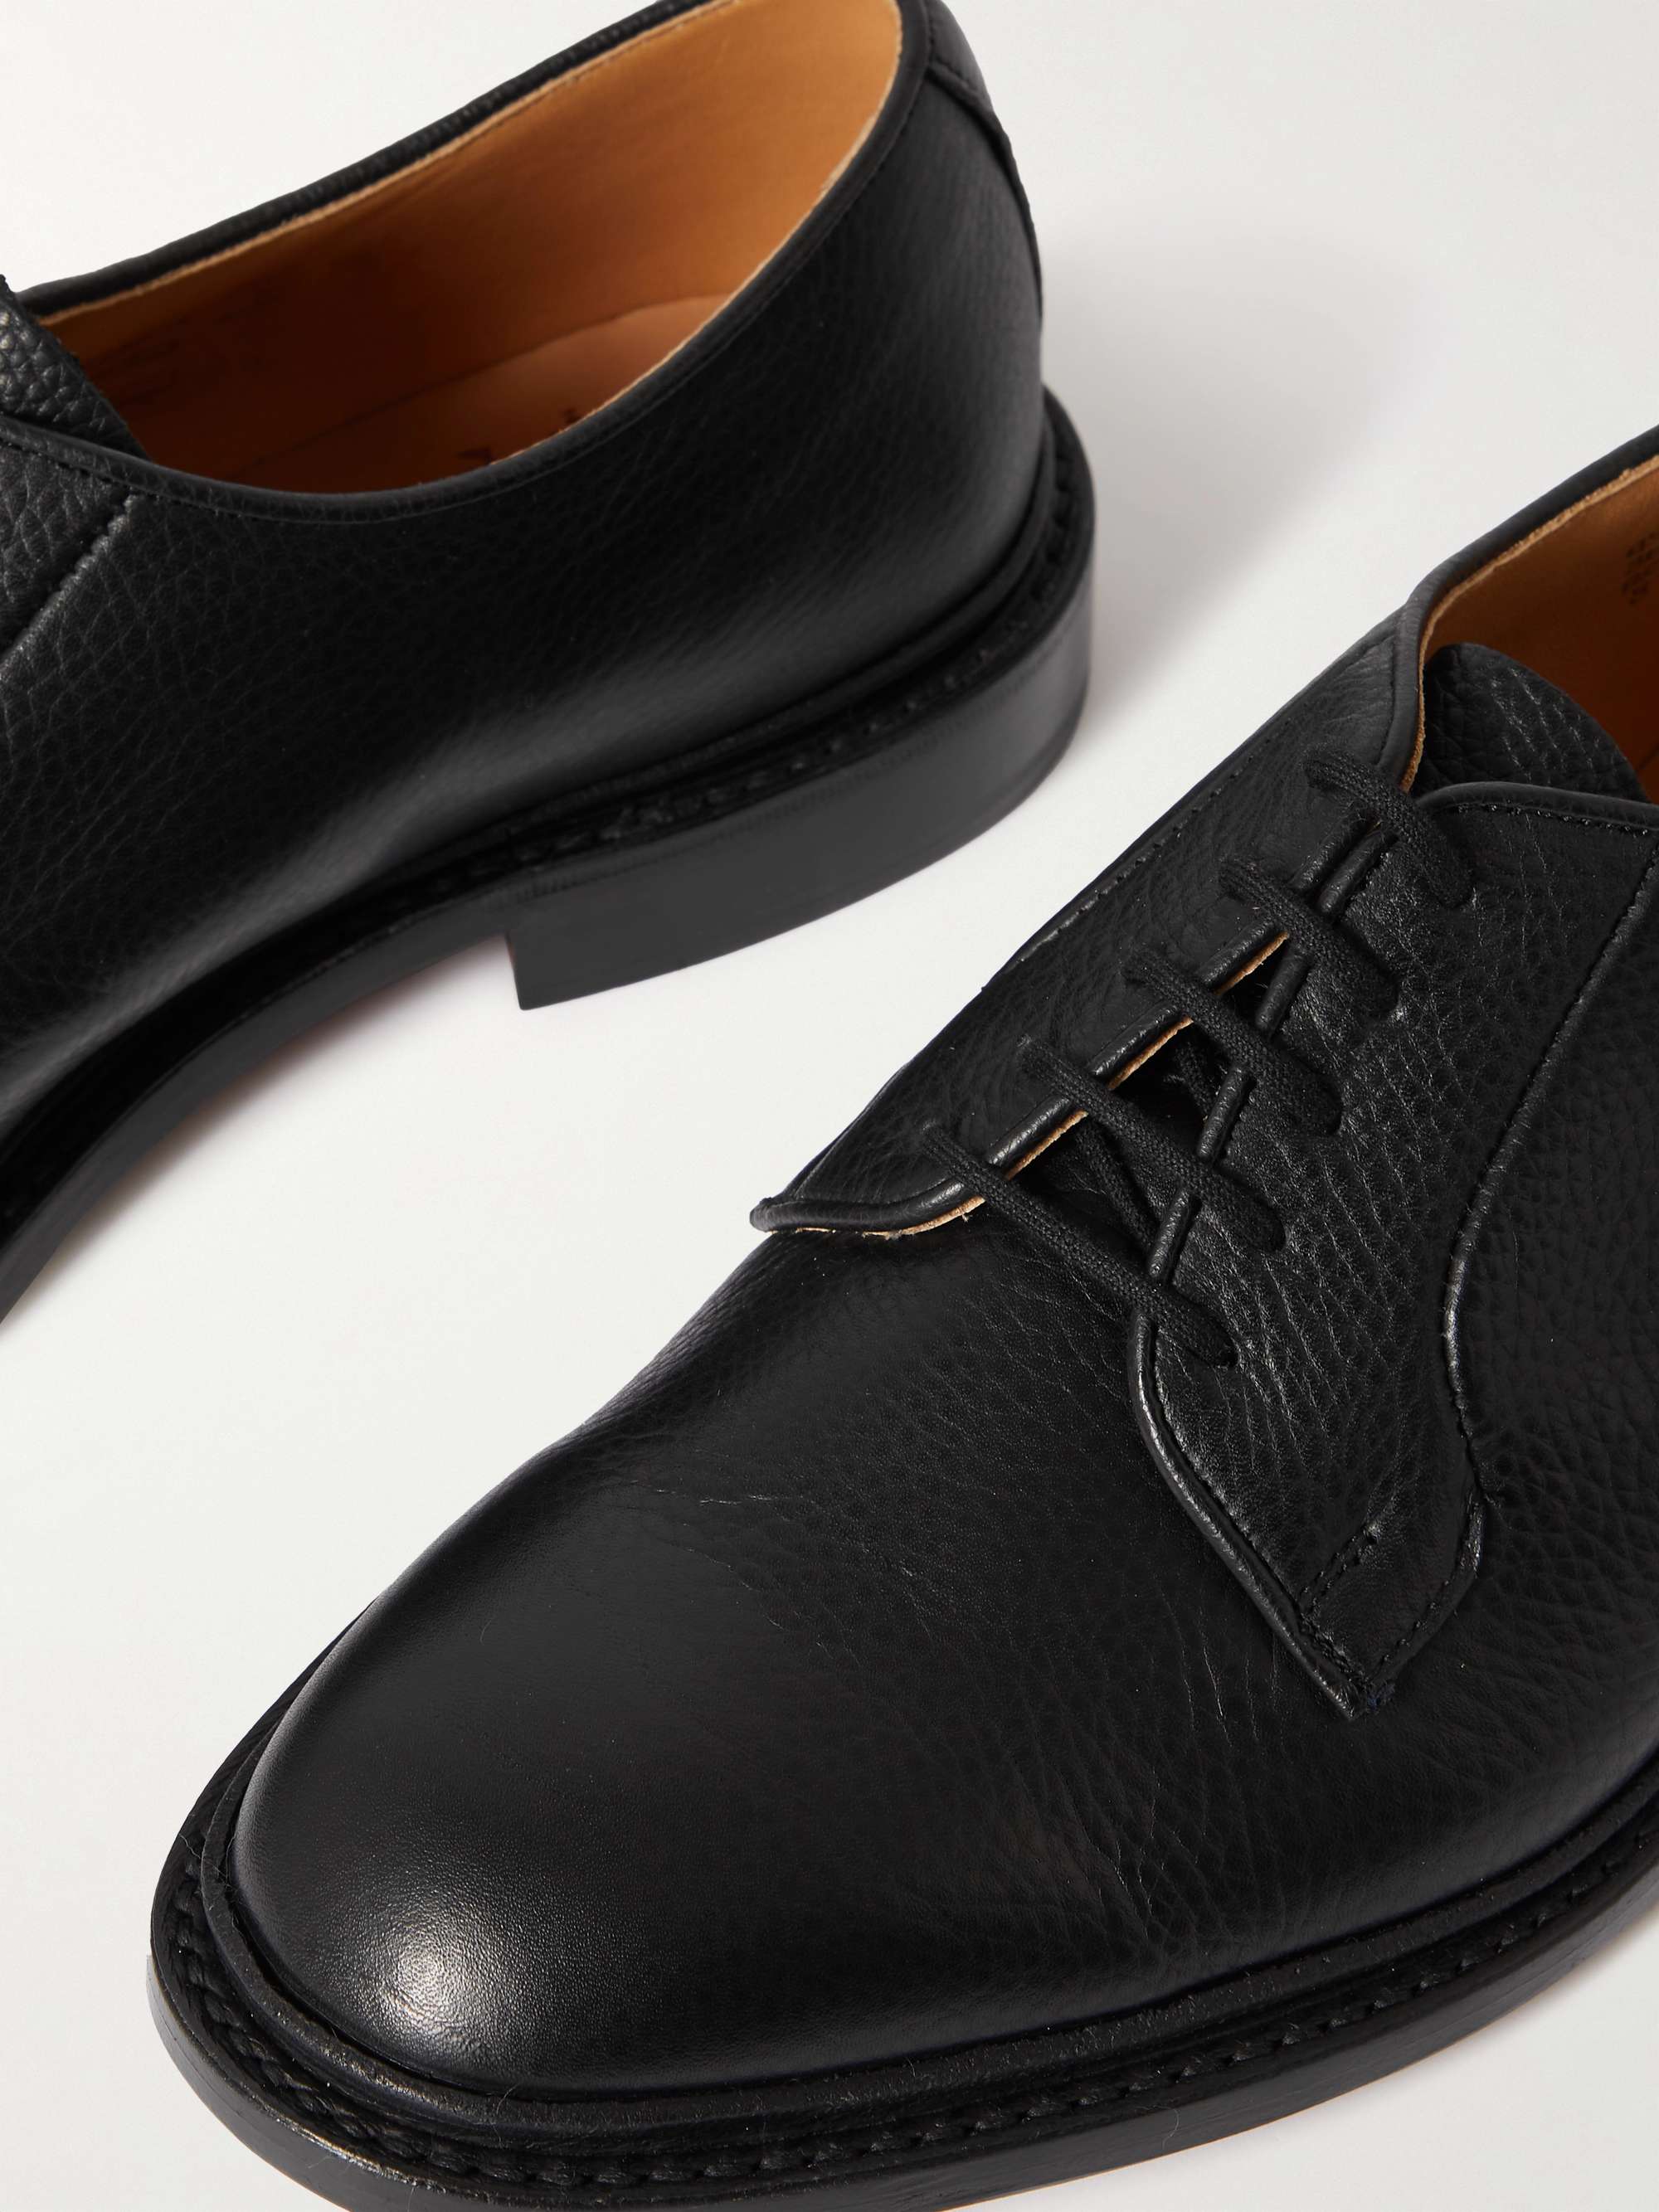 TRICKER'S Robert Full-Grain Leather Derby Shoes